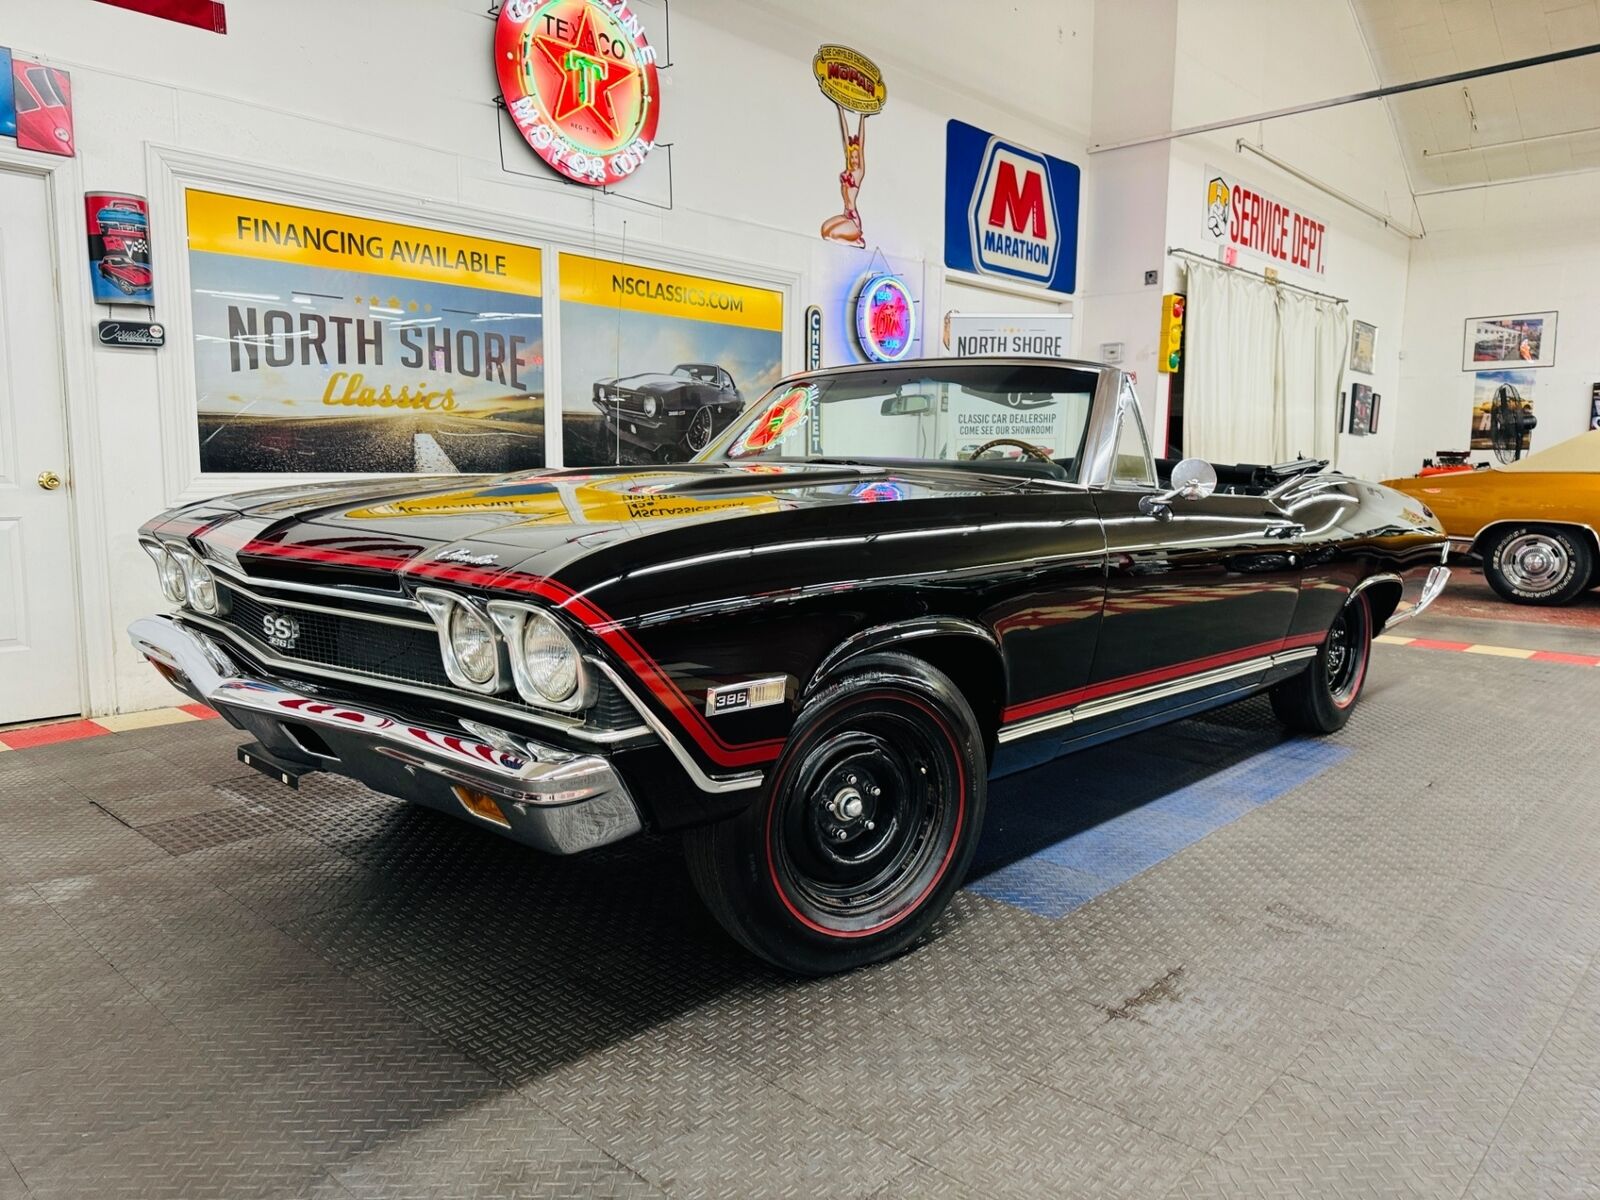 Owner Chevrolet Chevelle Black with 0 Miles, for sale!